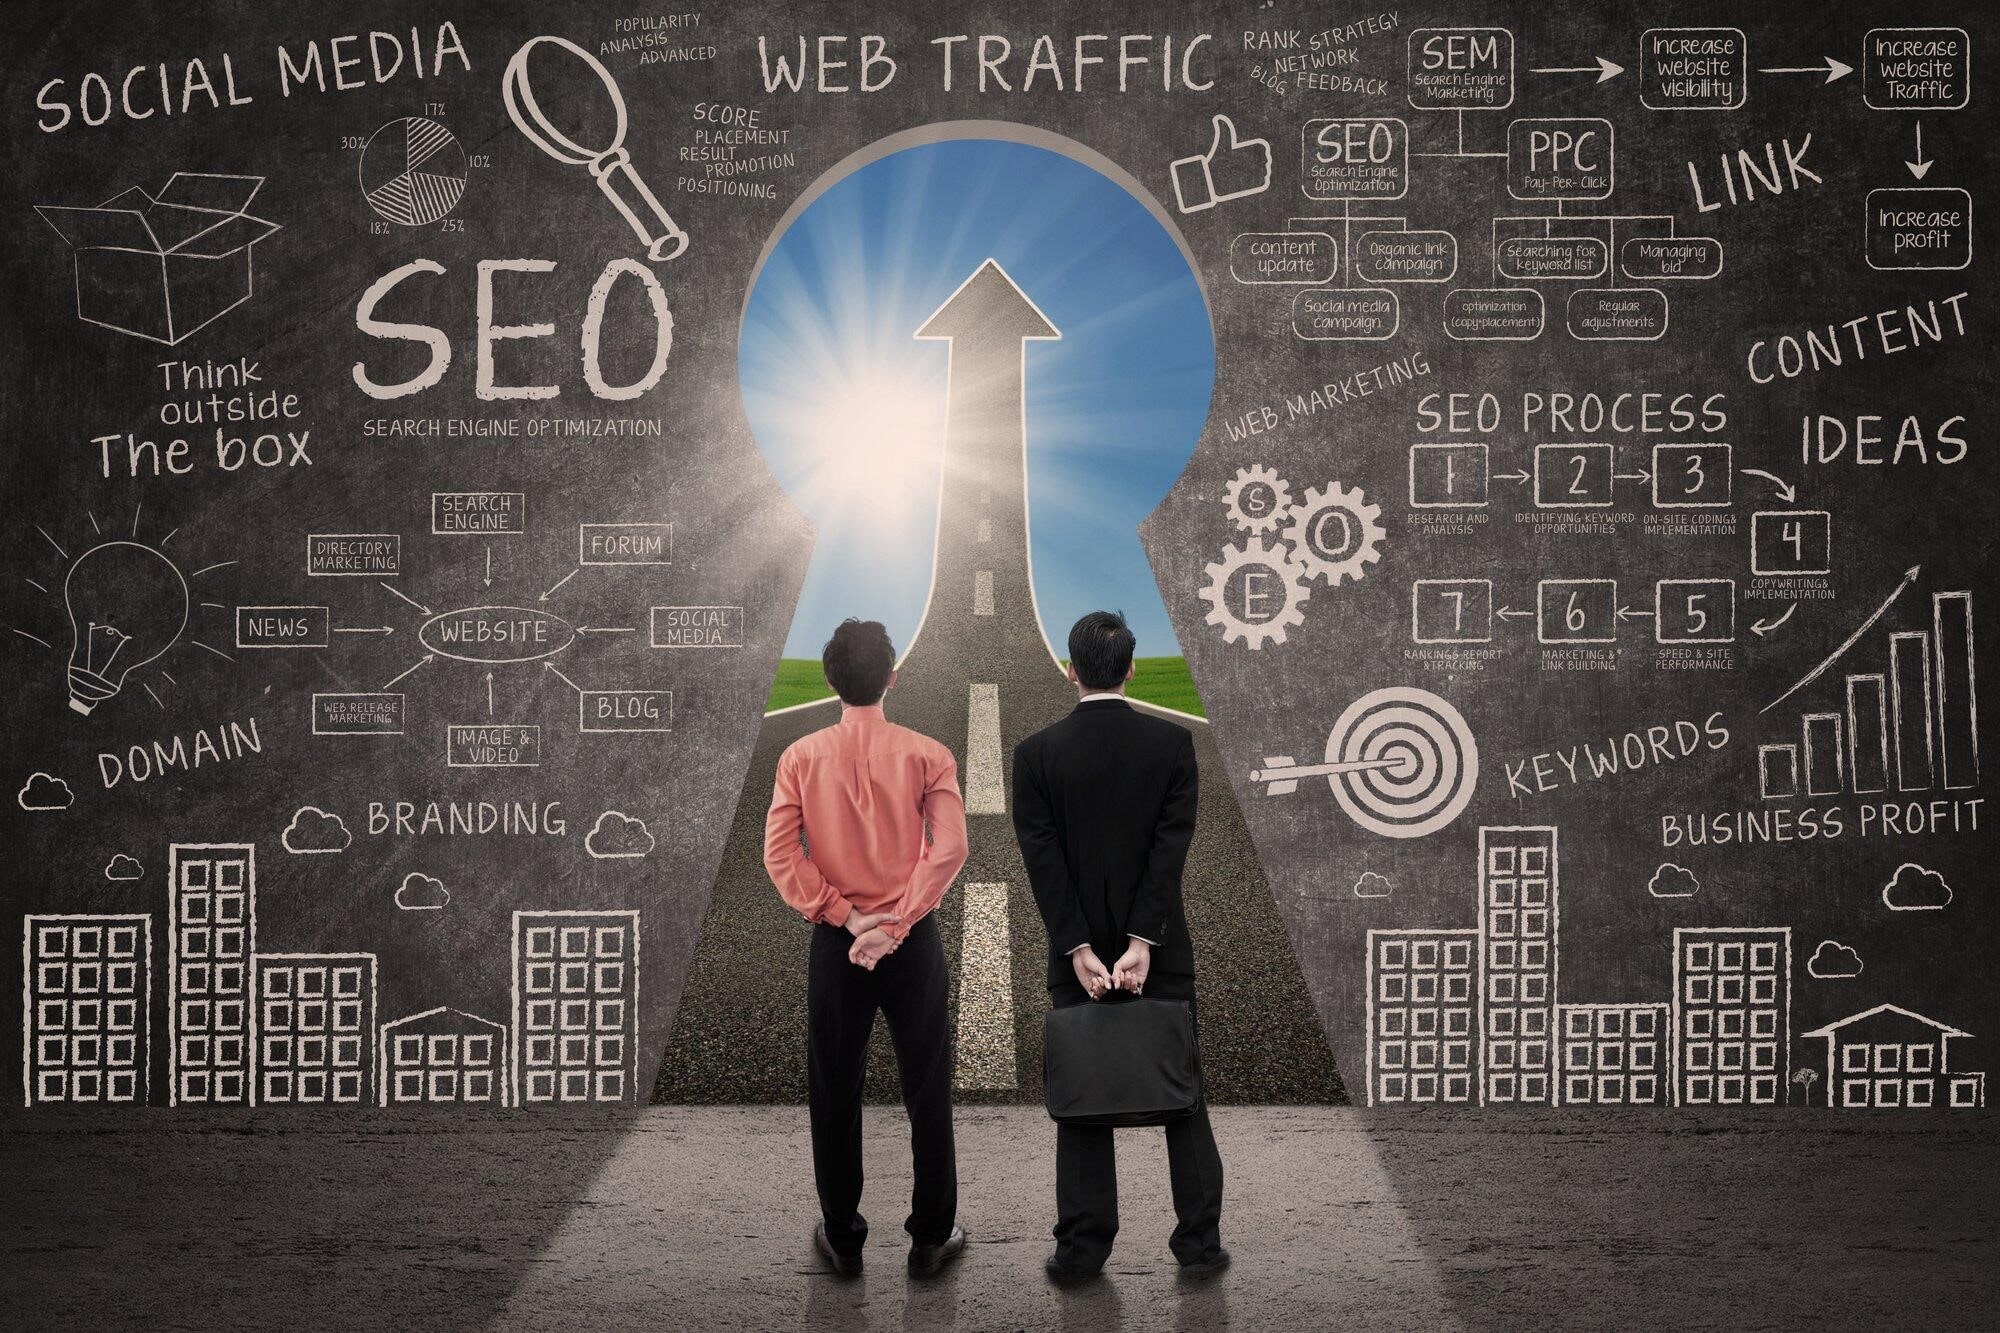 Role of Marketing in Online Visibility